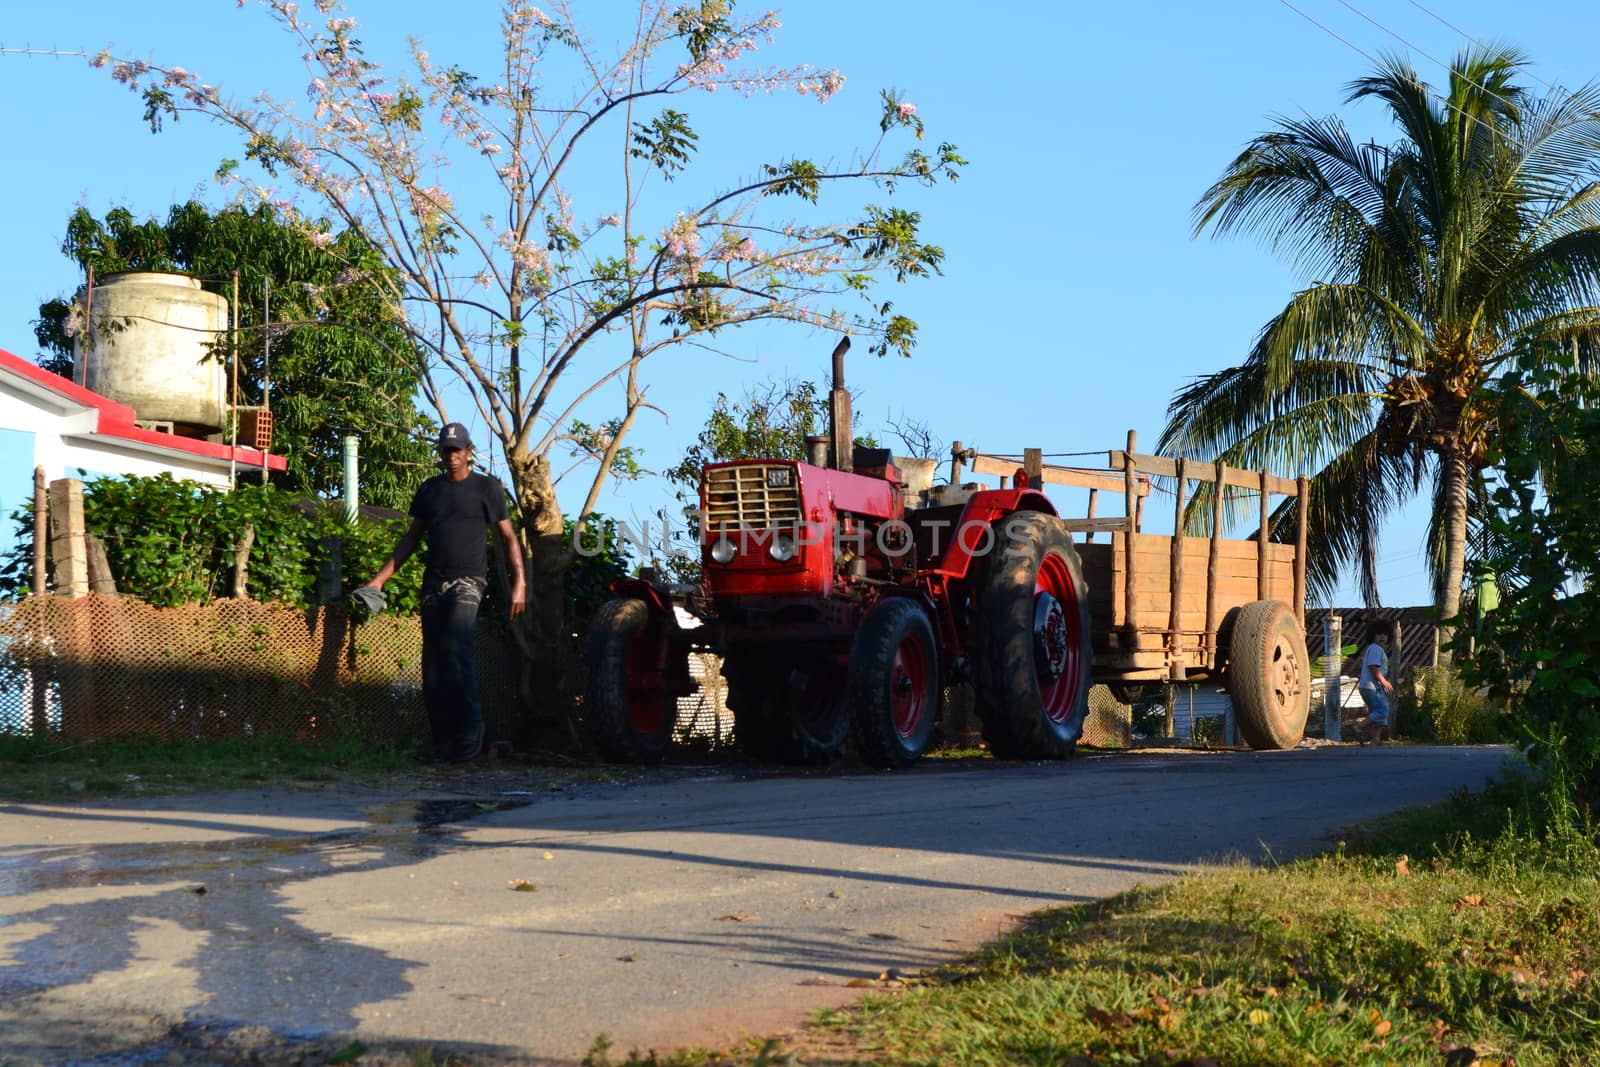 Old tractor of a farmer in the streets of Vinales, Cuba by kb79